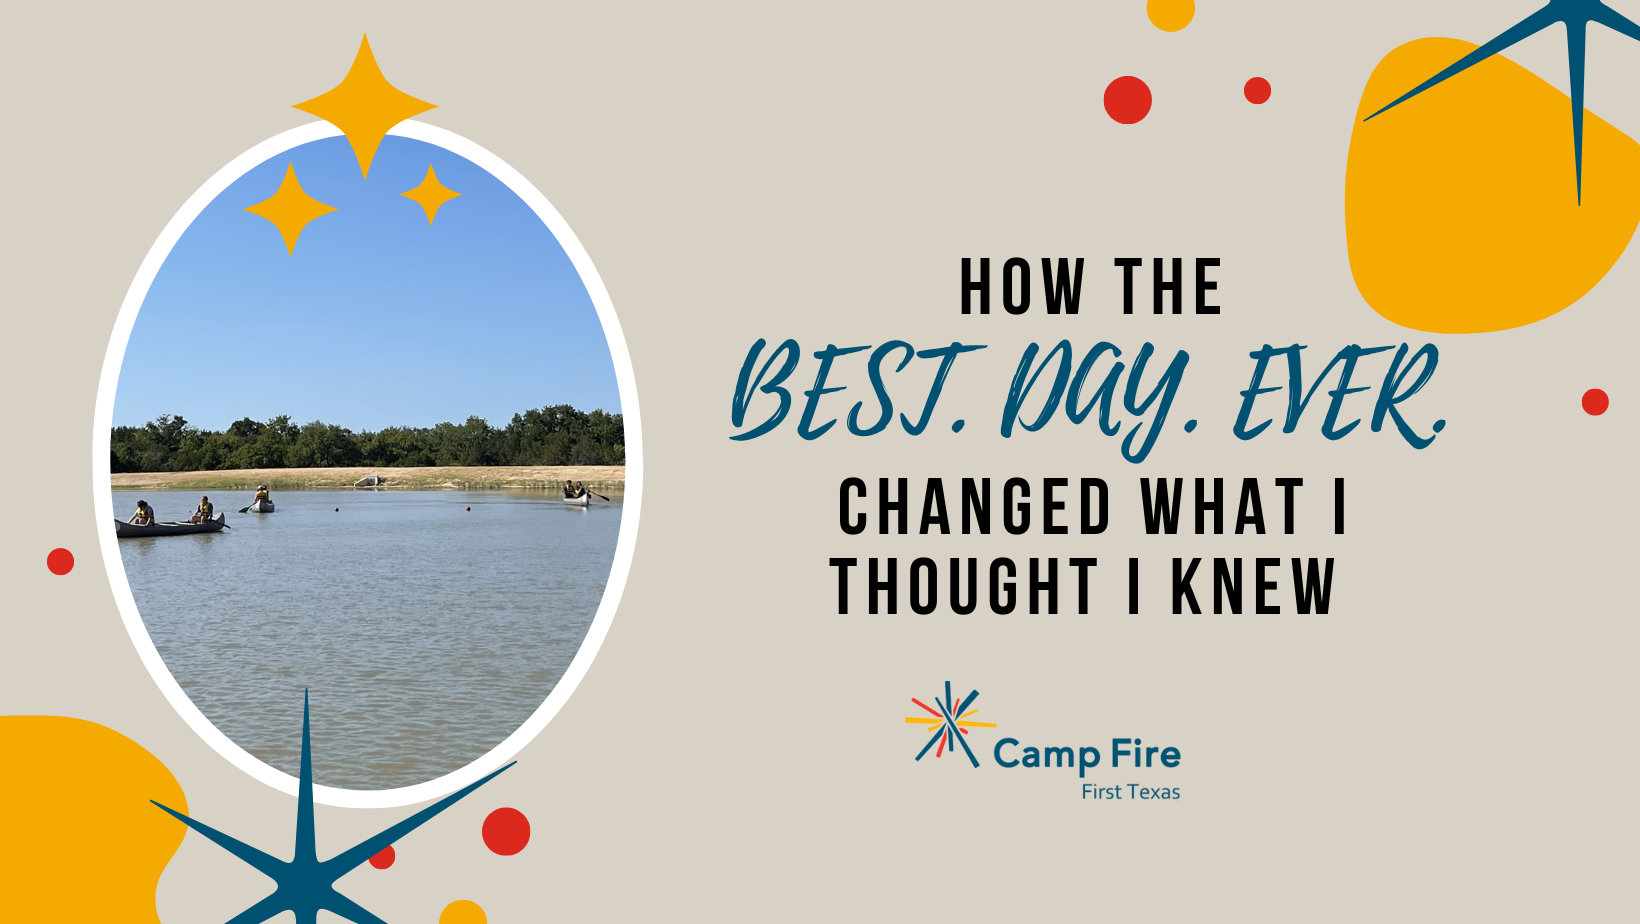 I Fundraise for Camp Fire First Texas, But My Favorite Part About My Job Might Surprise You, a Camp Fire First Texas blog by Julia Summers